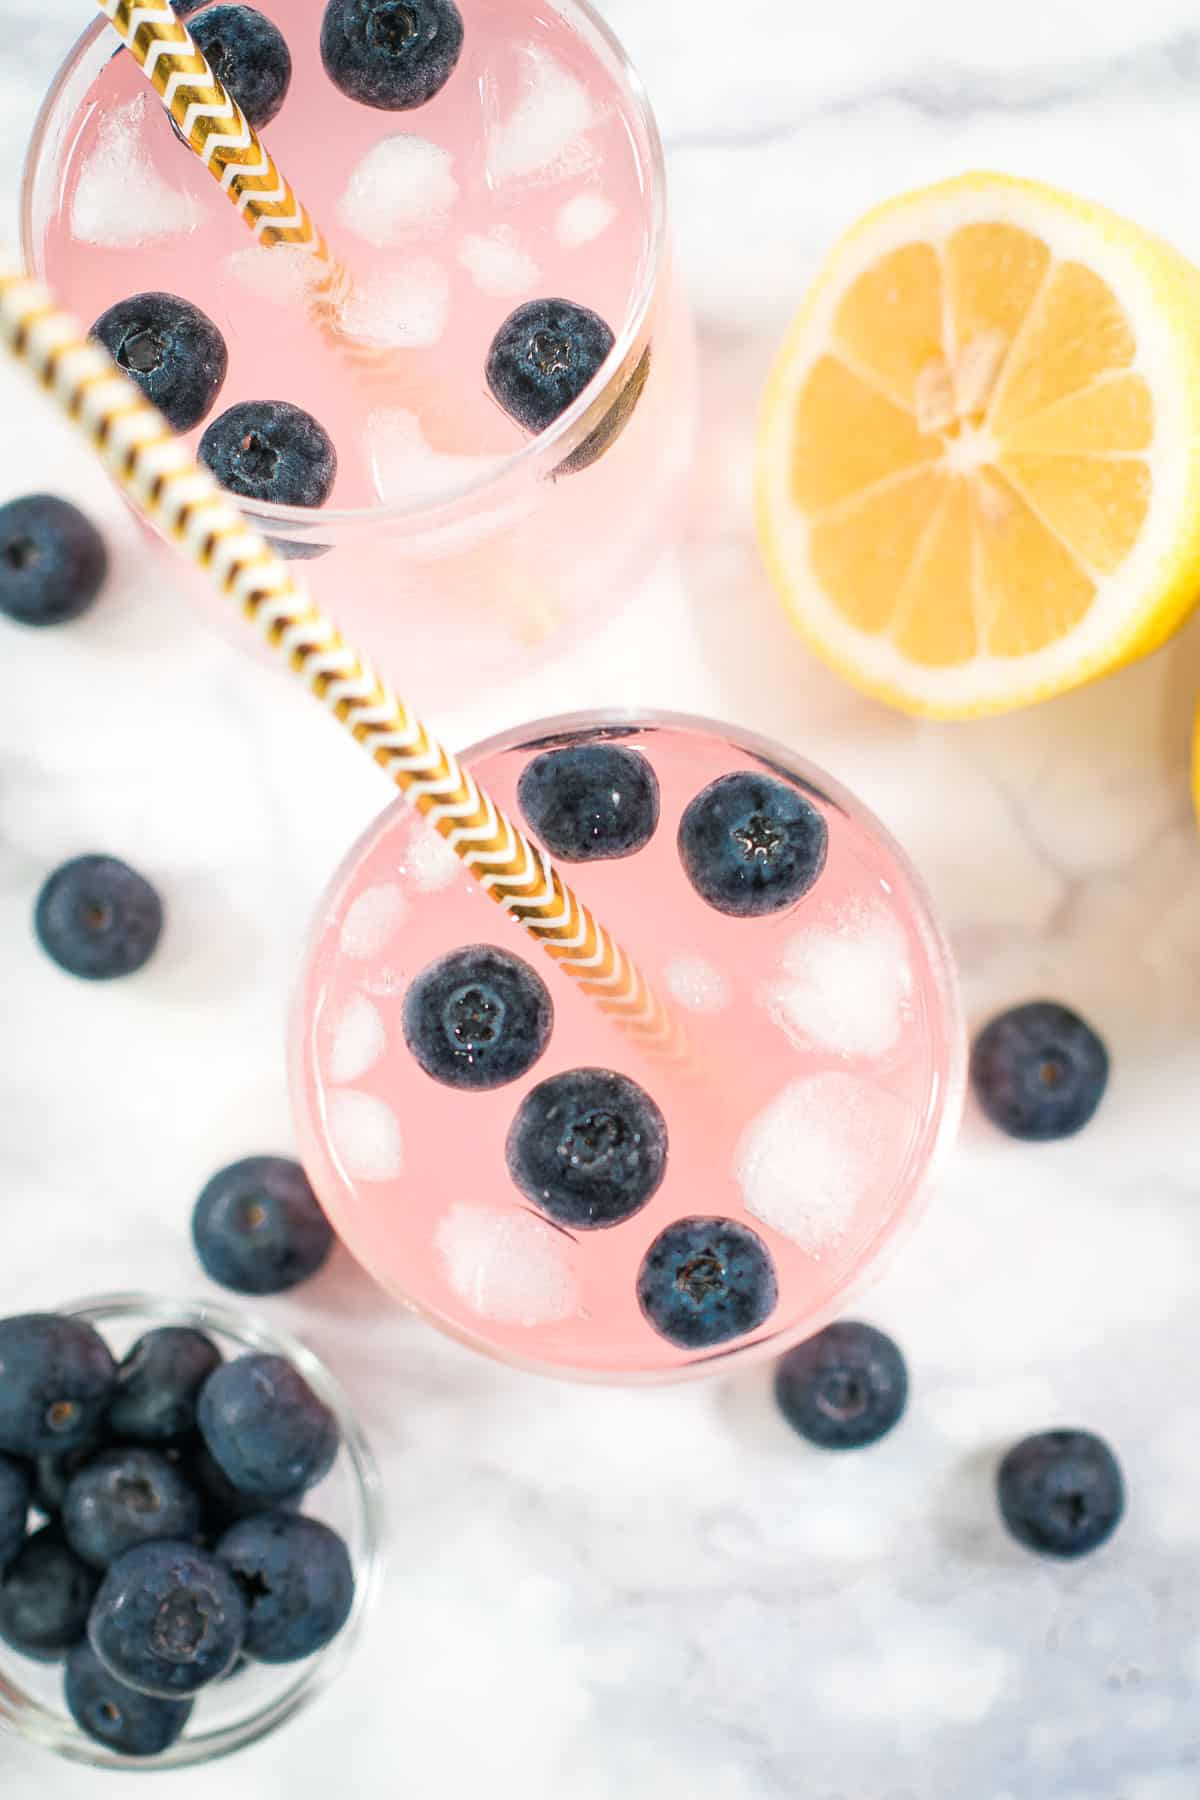 Top view of pink lemonade with blueberries in a glass.